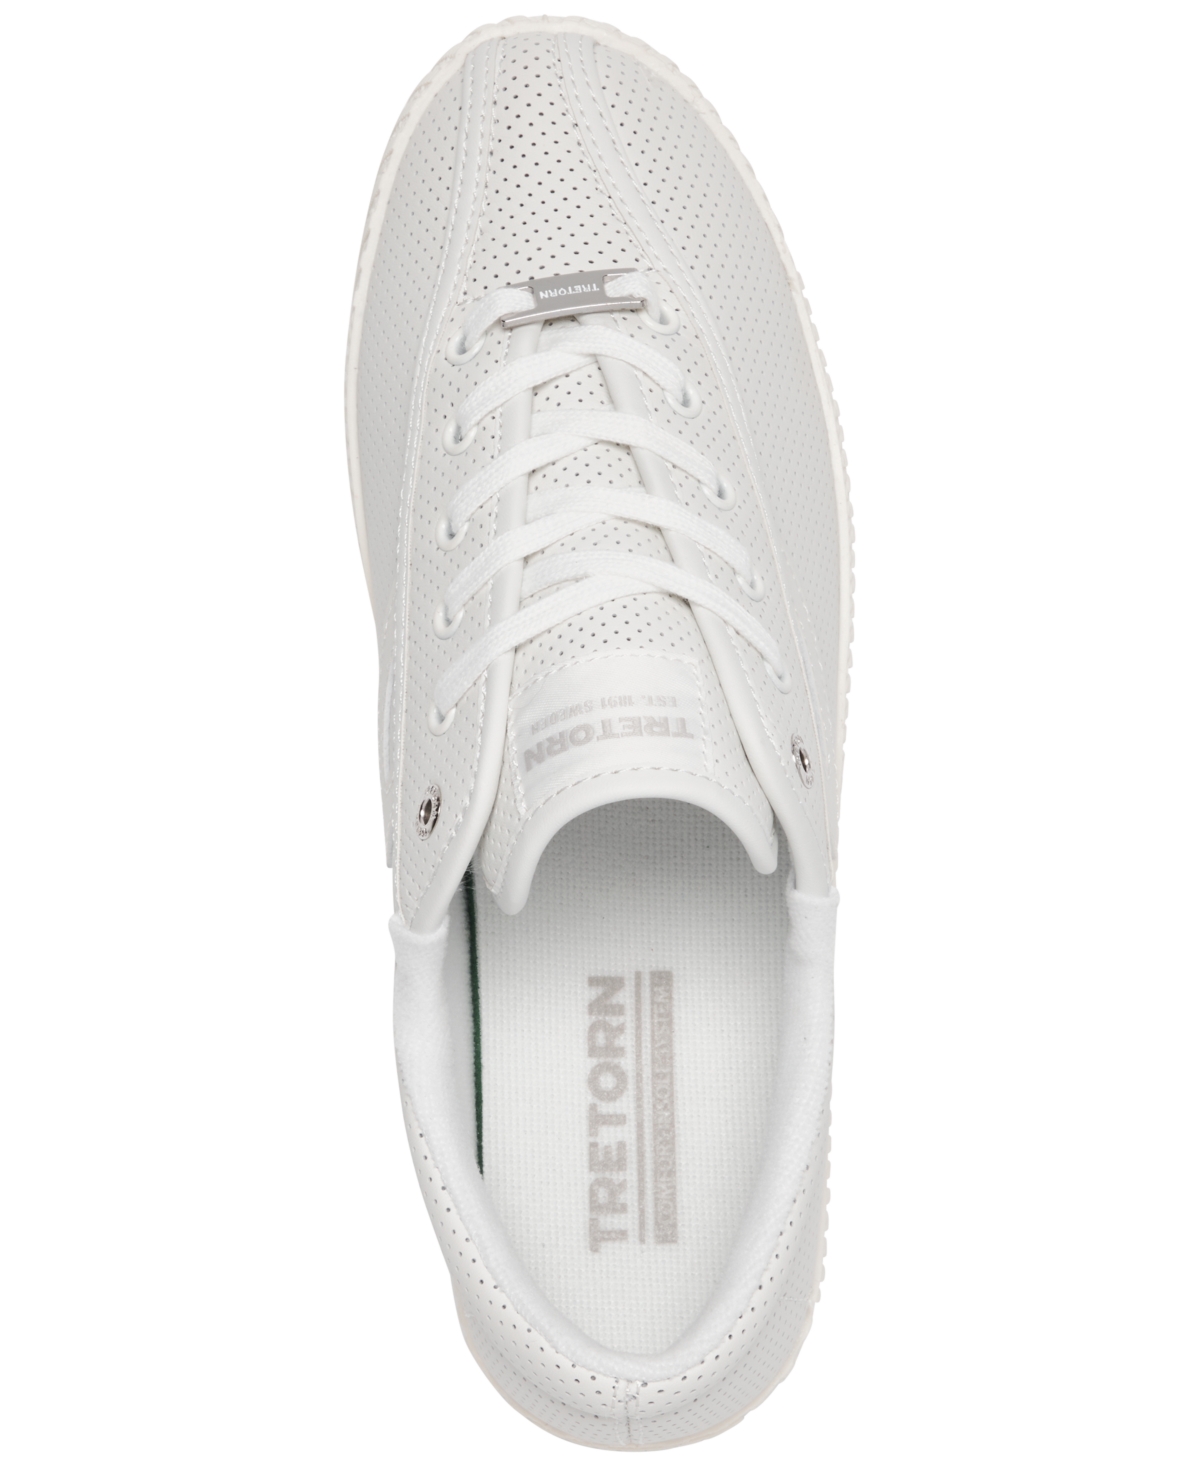 Shop Tretorn Women's Nylite Perforated Leather Casual Sneakers From Finish Line In White